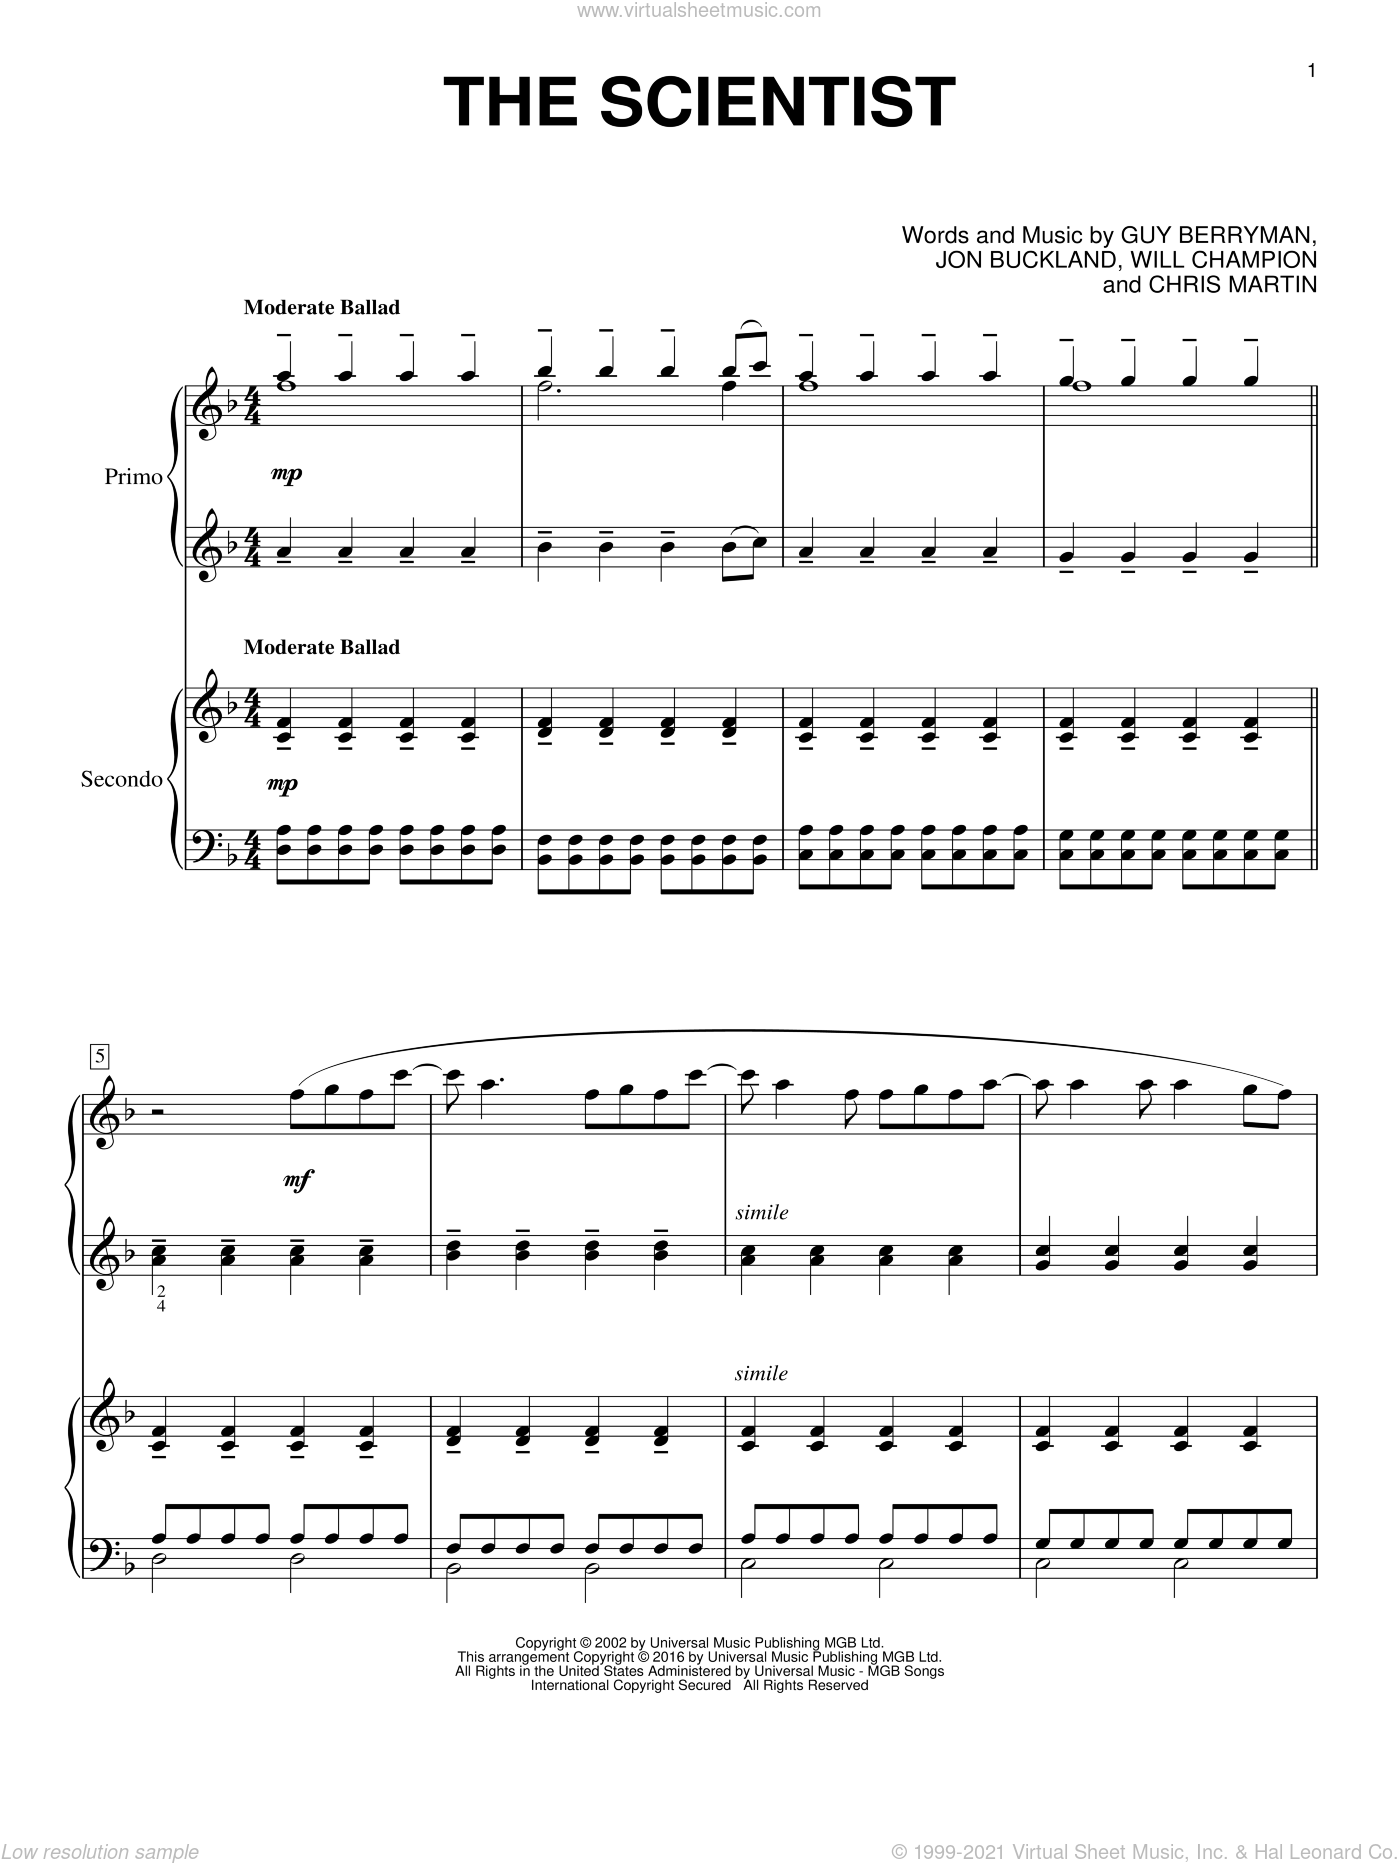 Coldplay - The Scientist sheet music for piano four hands